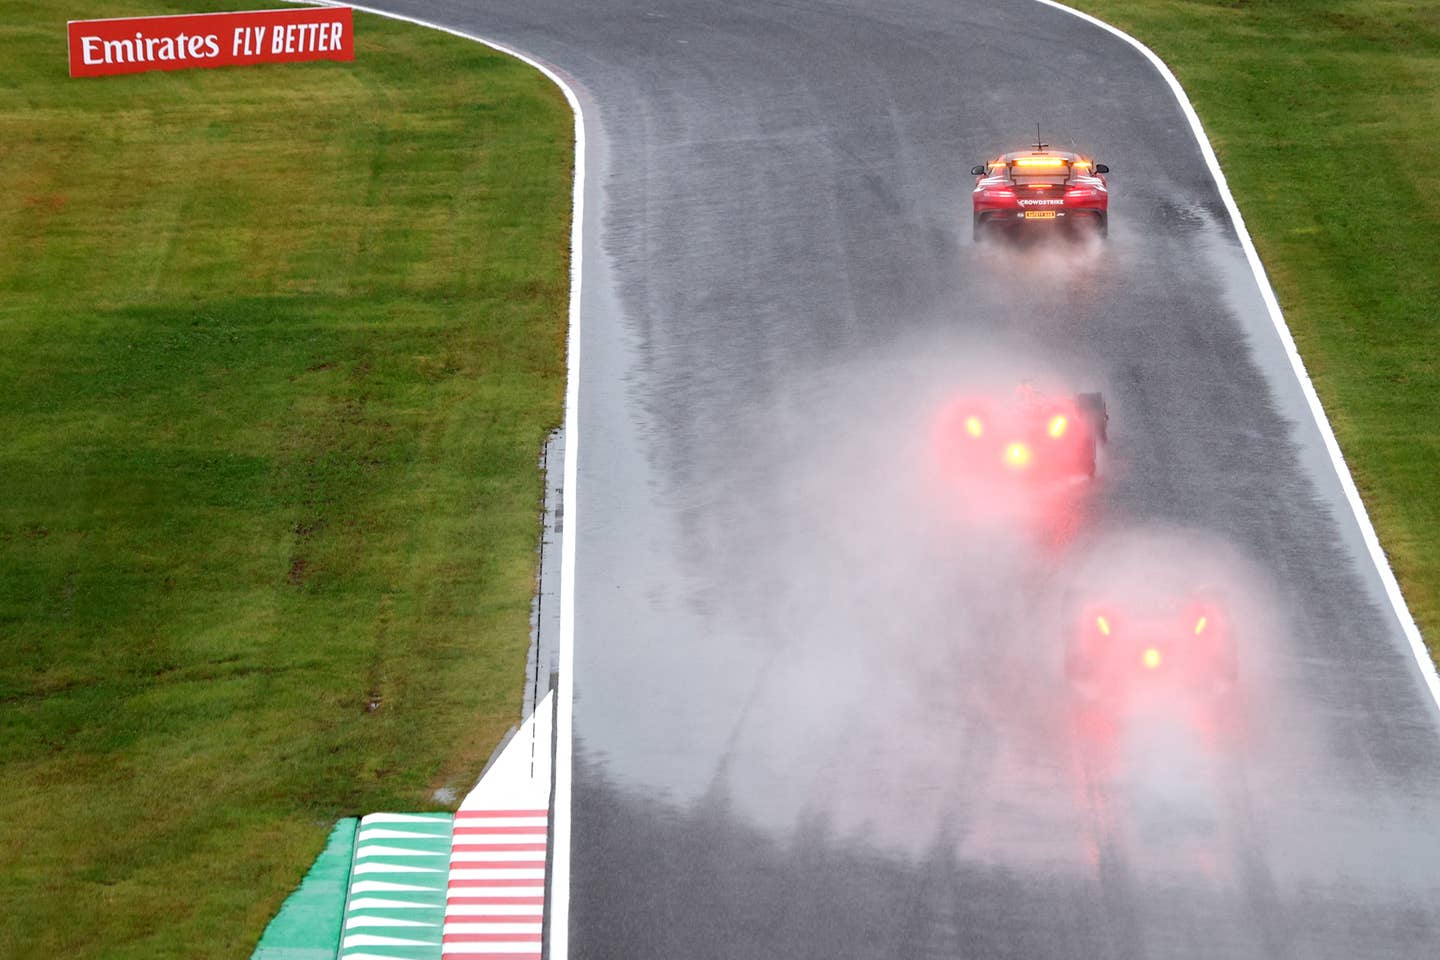 Look at the difference in spray—Safety car is leading two F1 cars | Photo by Clive Rose/Getty Images